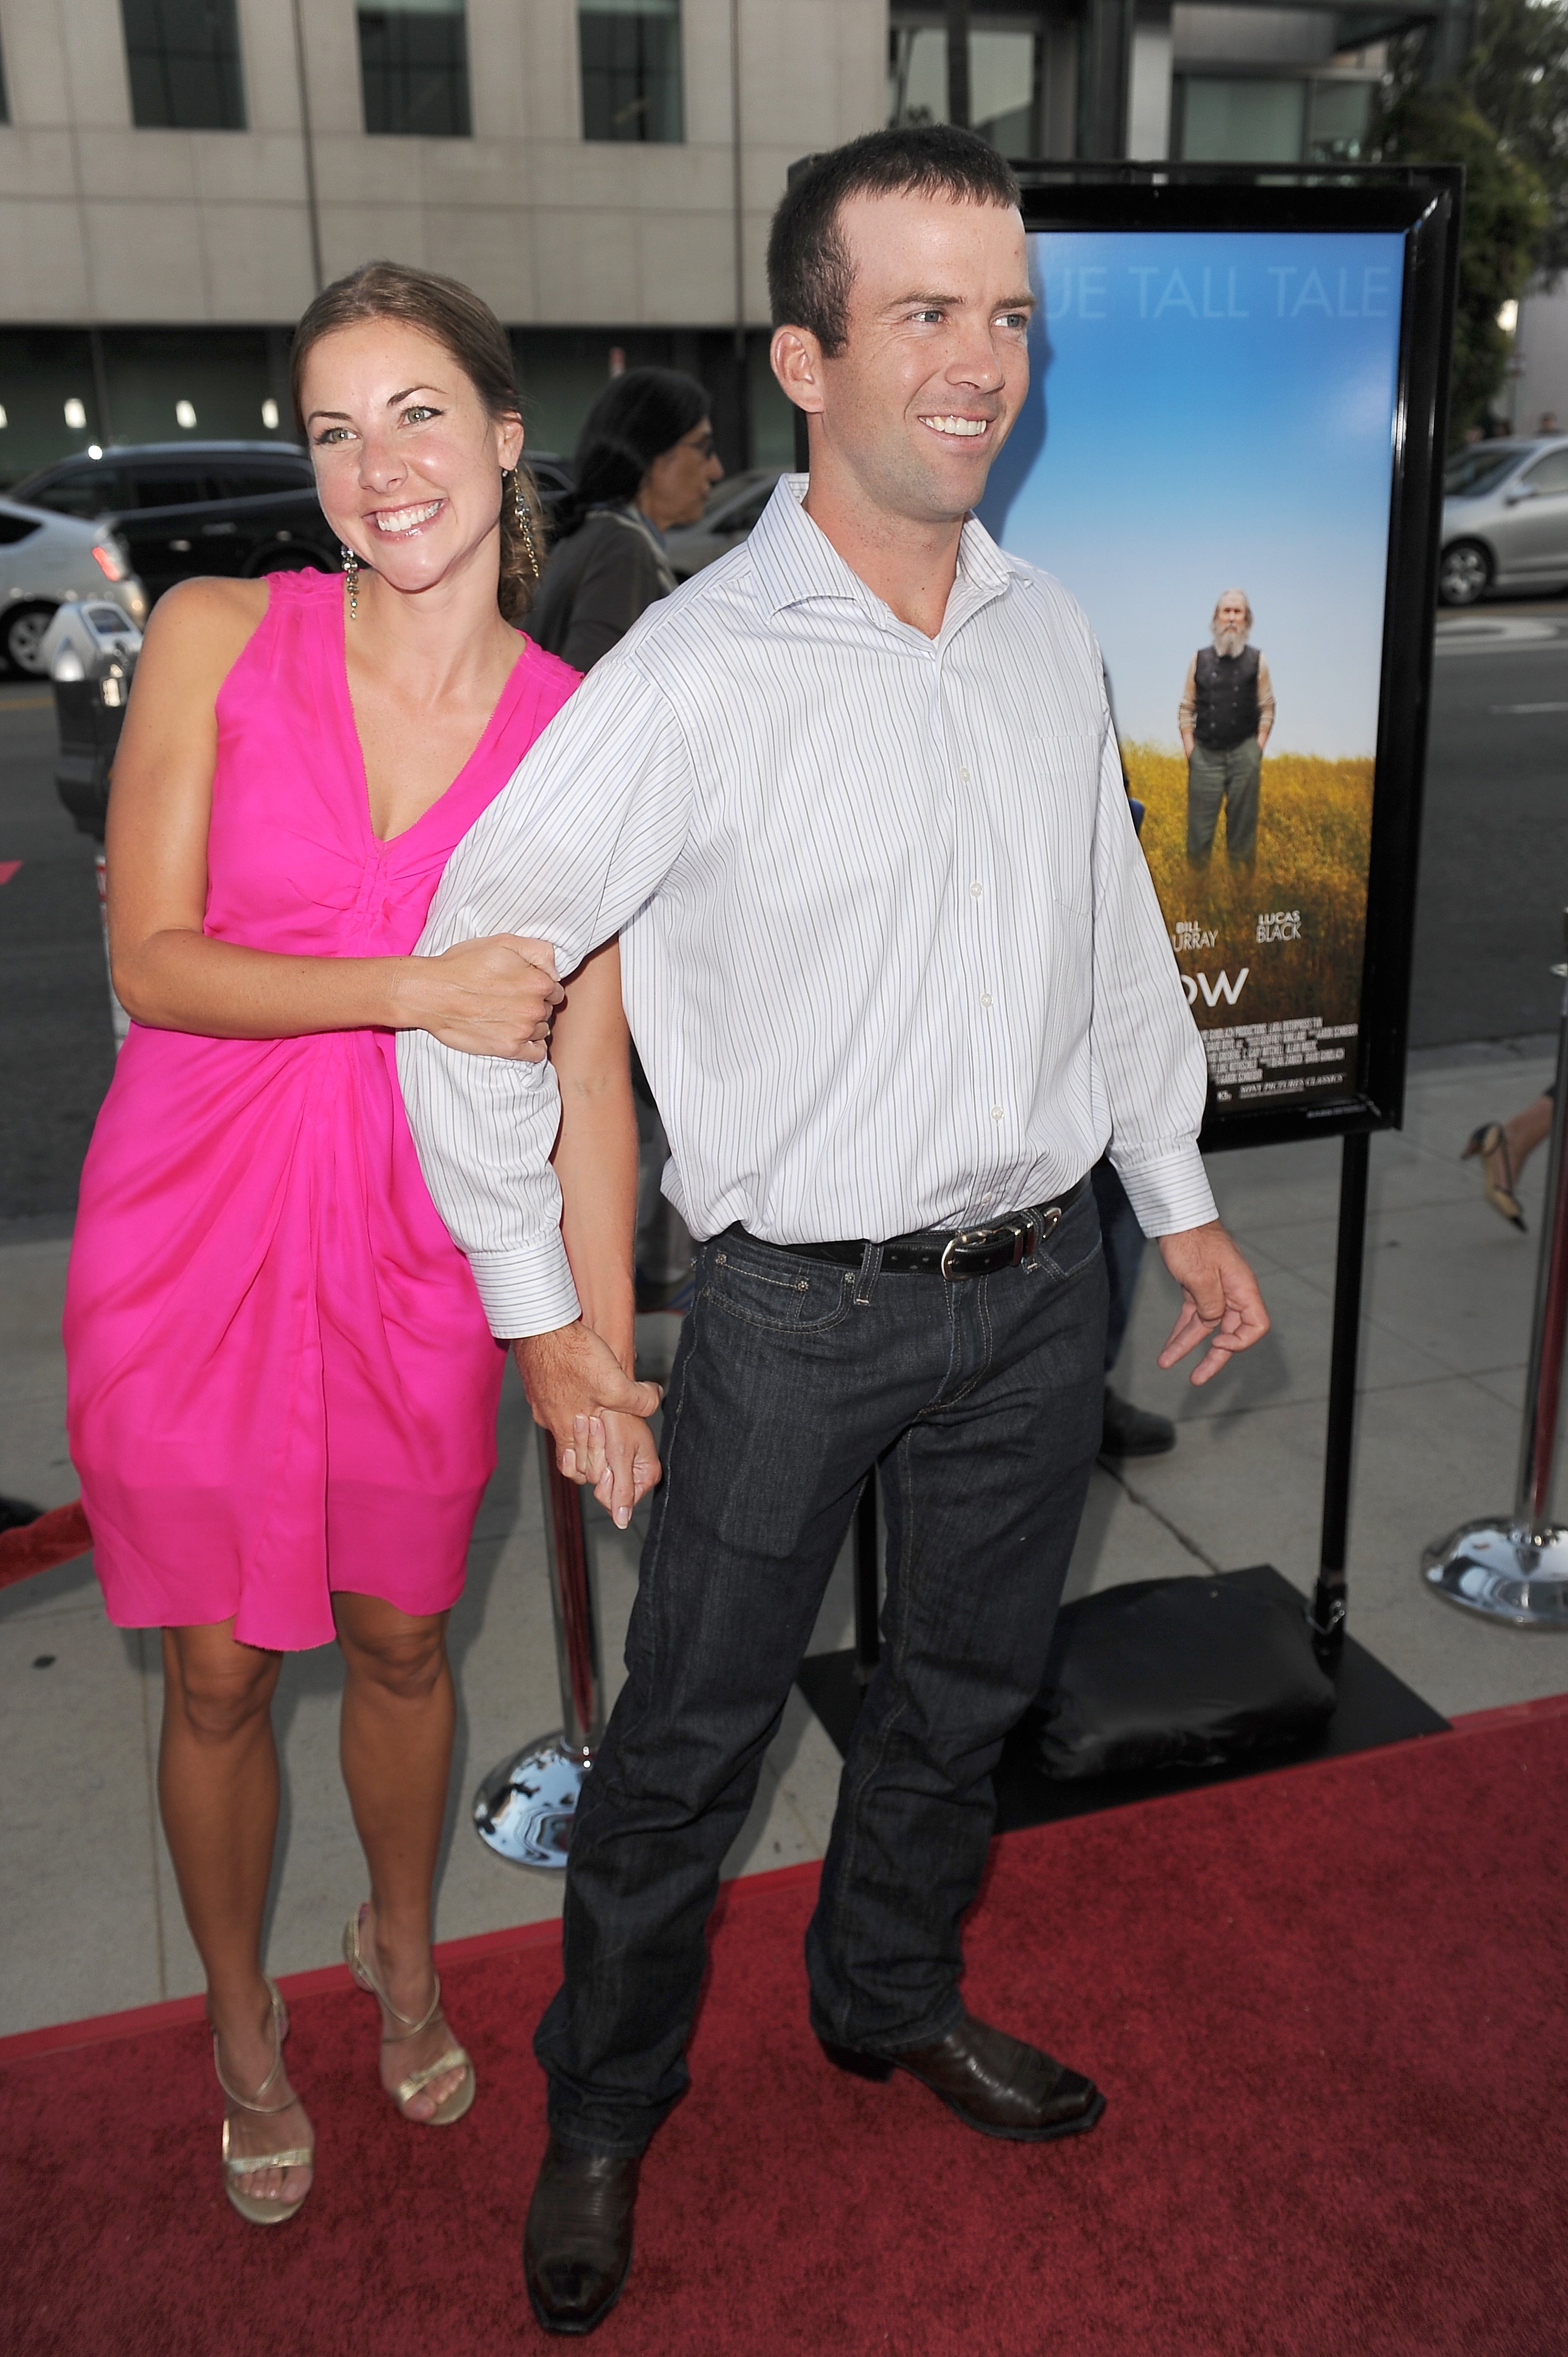 Maggie and Lucas Black at the Los Angeles premiere of "Get Low" in Beverly Hills on July 27, 2010 | Source: Getty Images